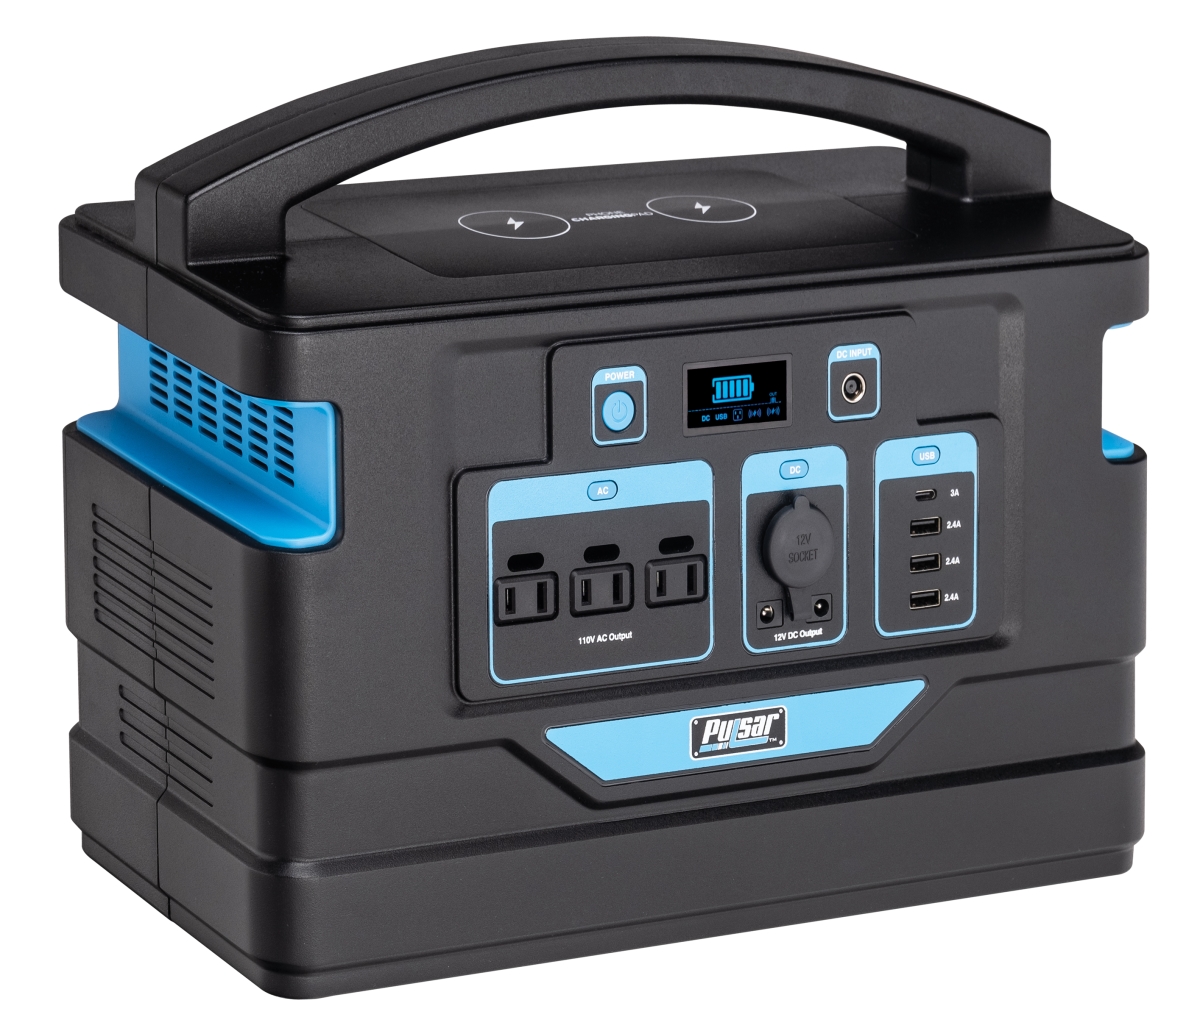 1000 Watt Lithium-Ion Portable Power Station with LCD Display & Wireless Charging Pads -  tool, TO3128061